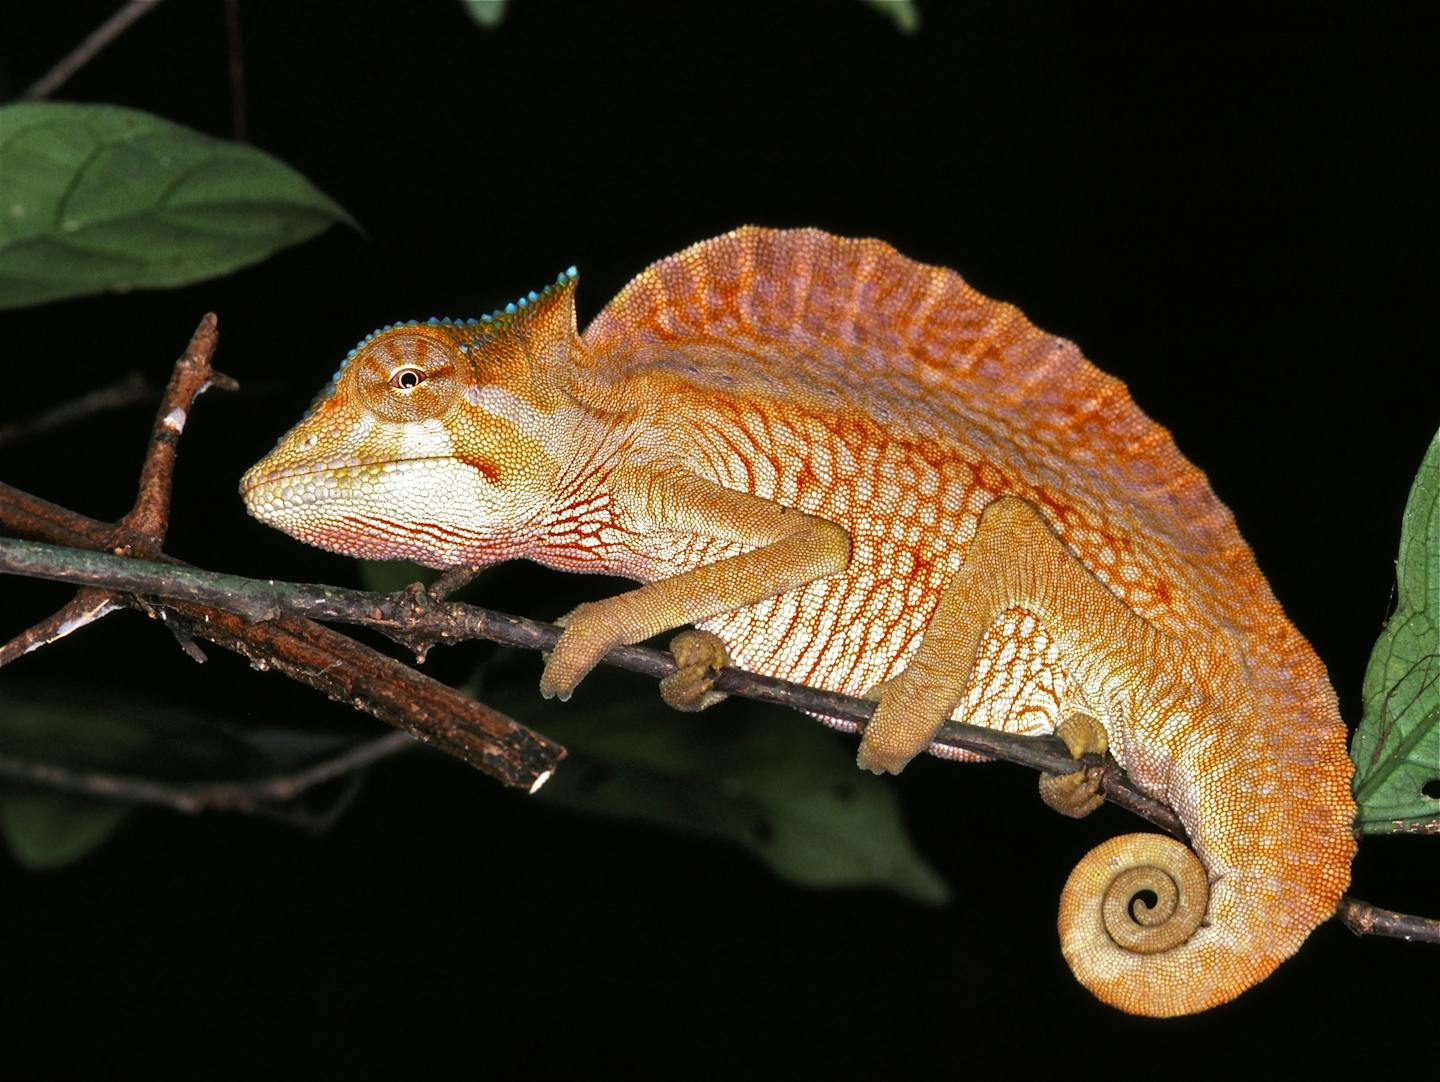 How crested chameleons amazingly change color to communicate